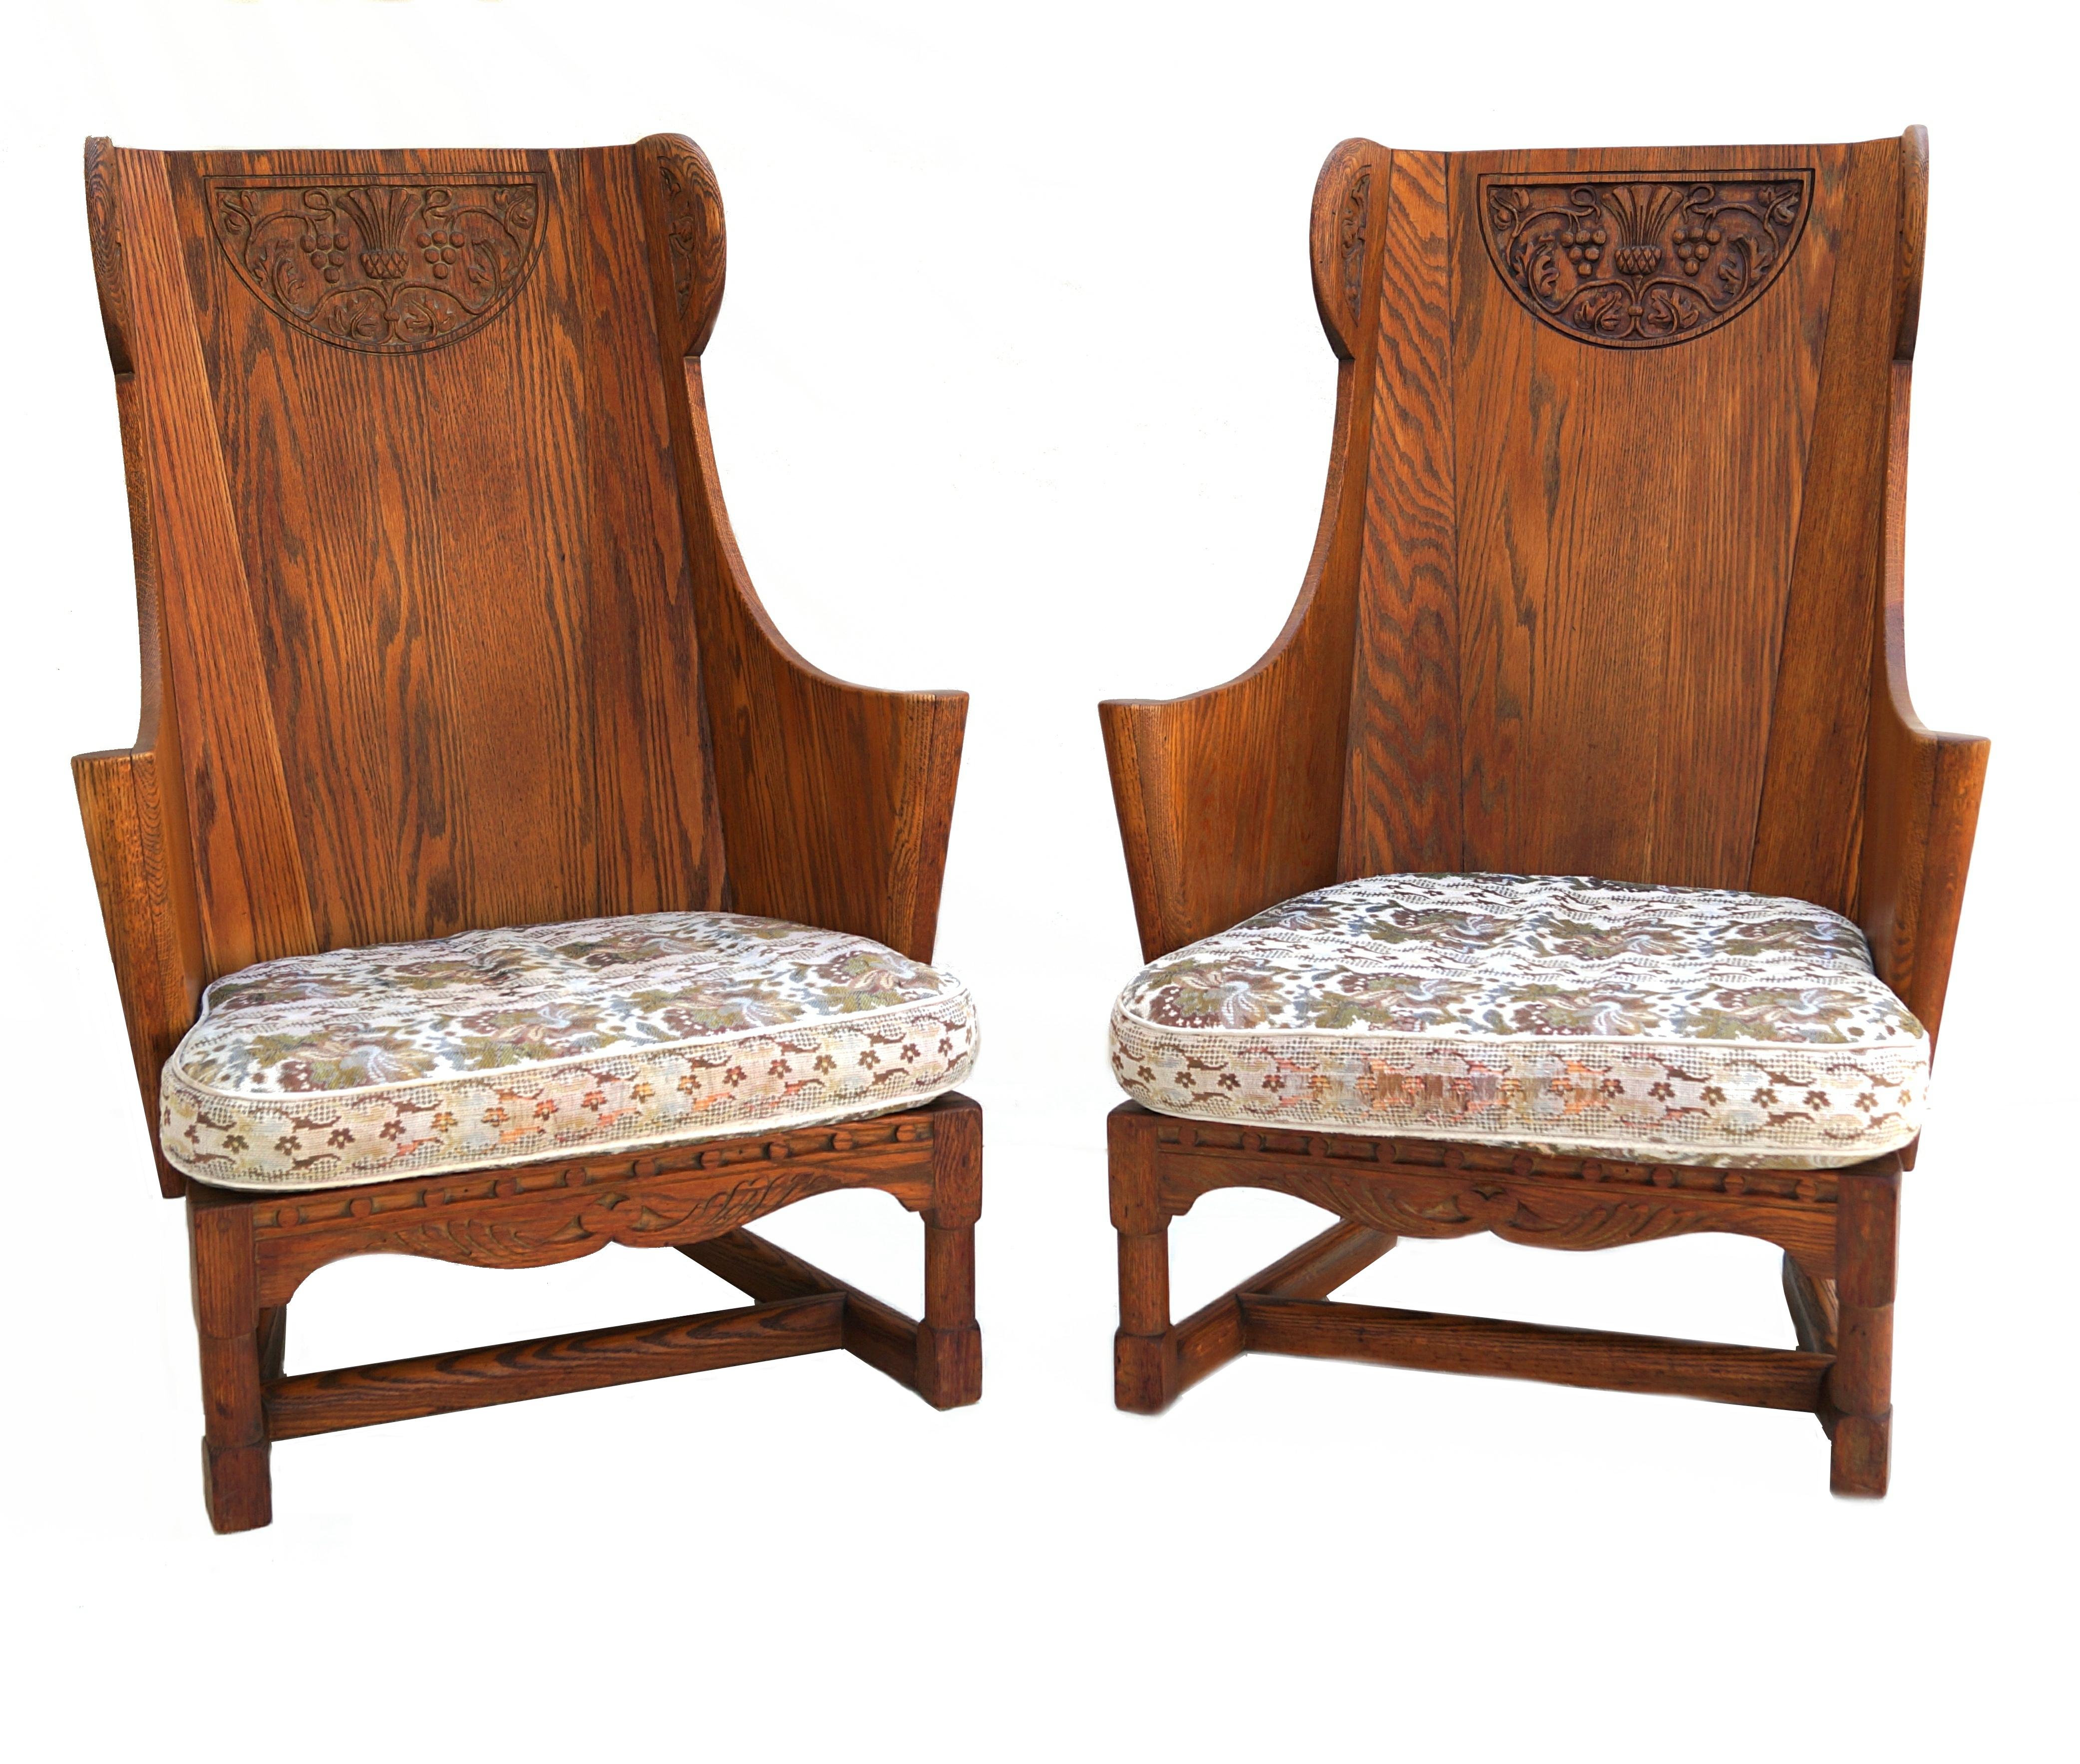 Antique pair of paneled wood wing chairs by Jamestown Lounge Company, with angled legs and base with tall back with curved sides, scrolled arms and detailed carved panels around the top with dovetail workmanship.